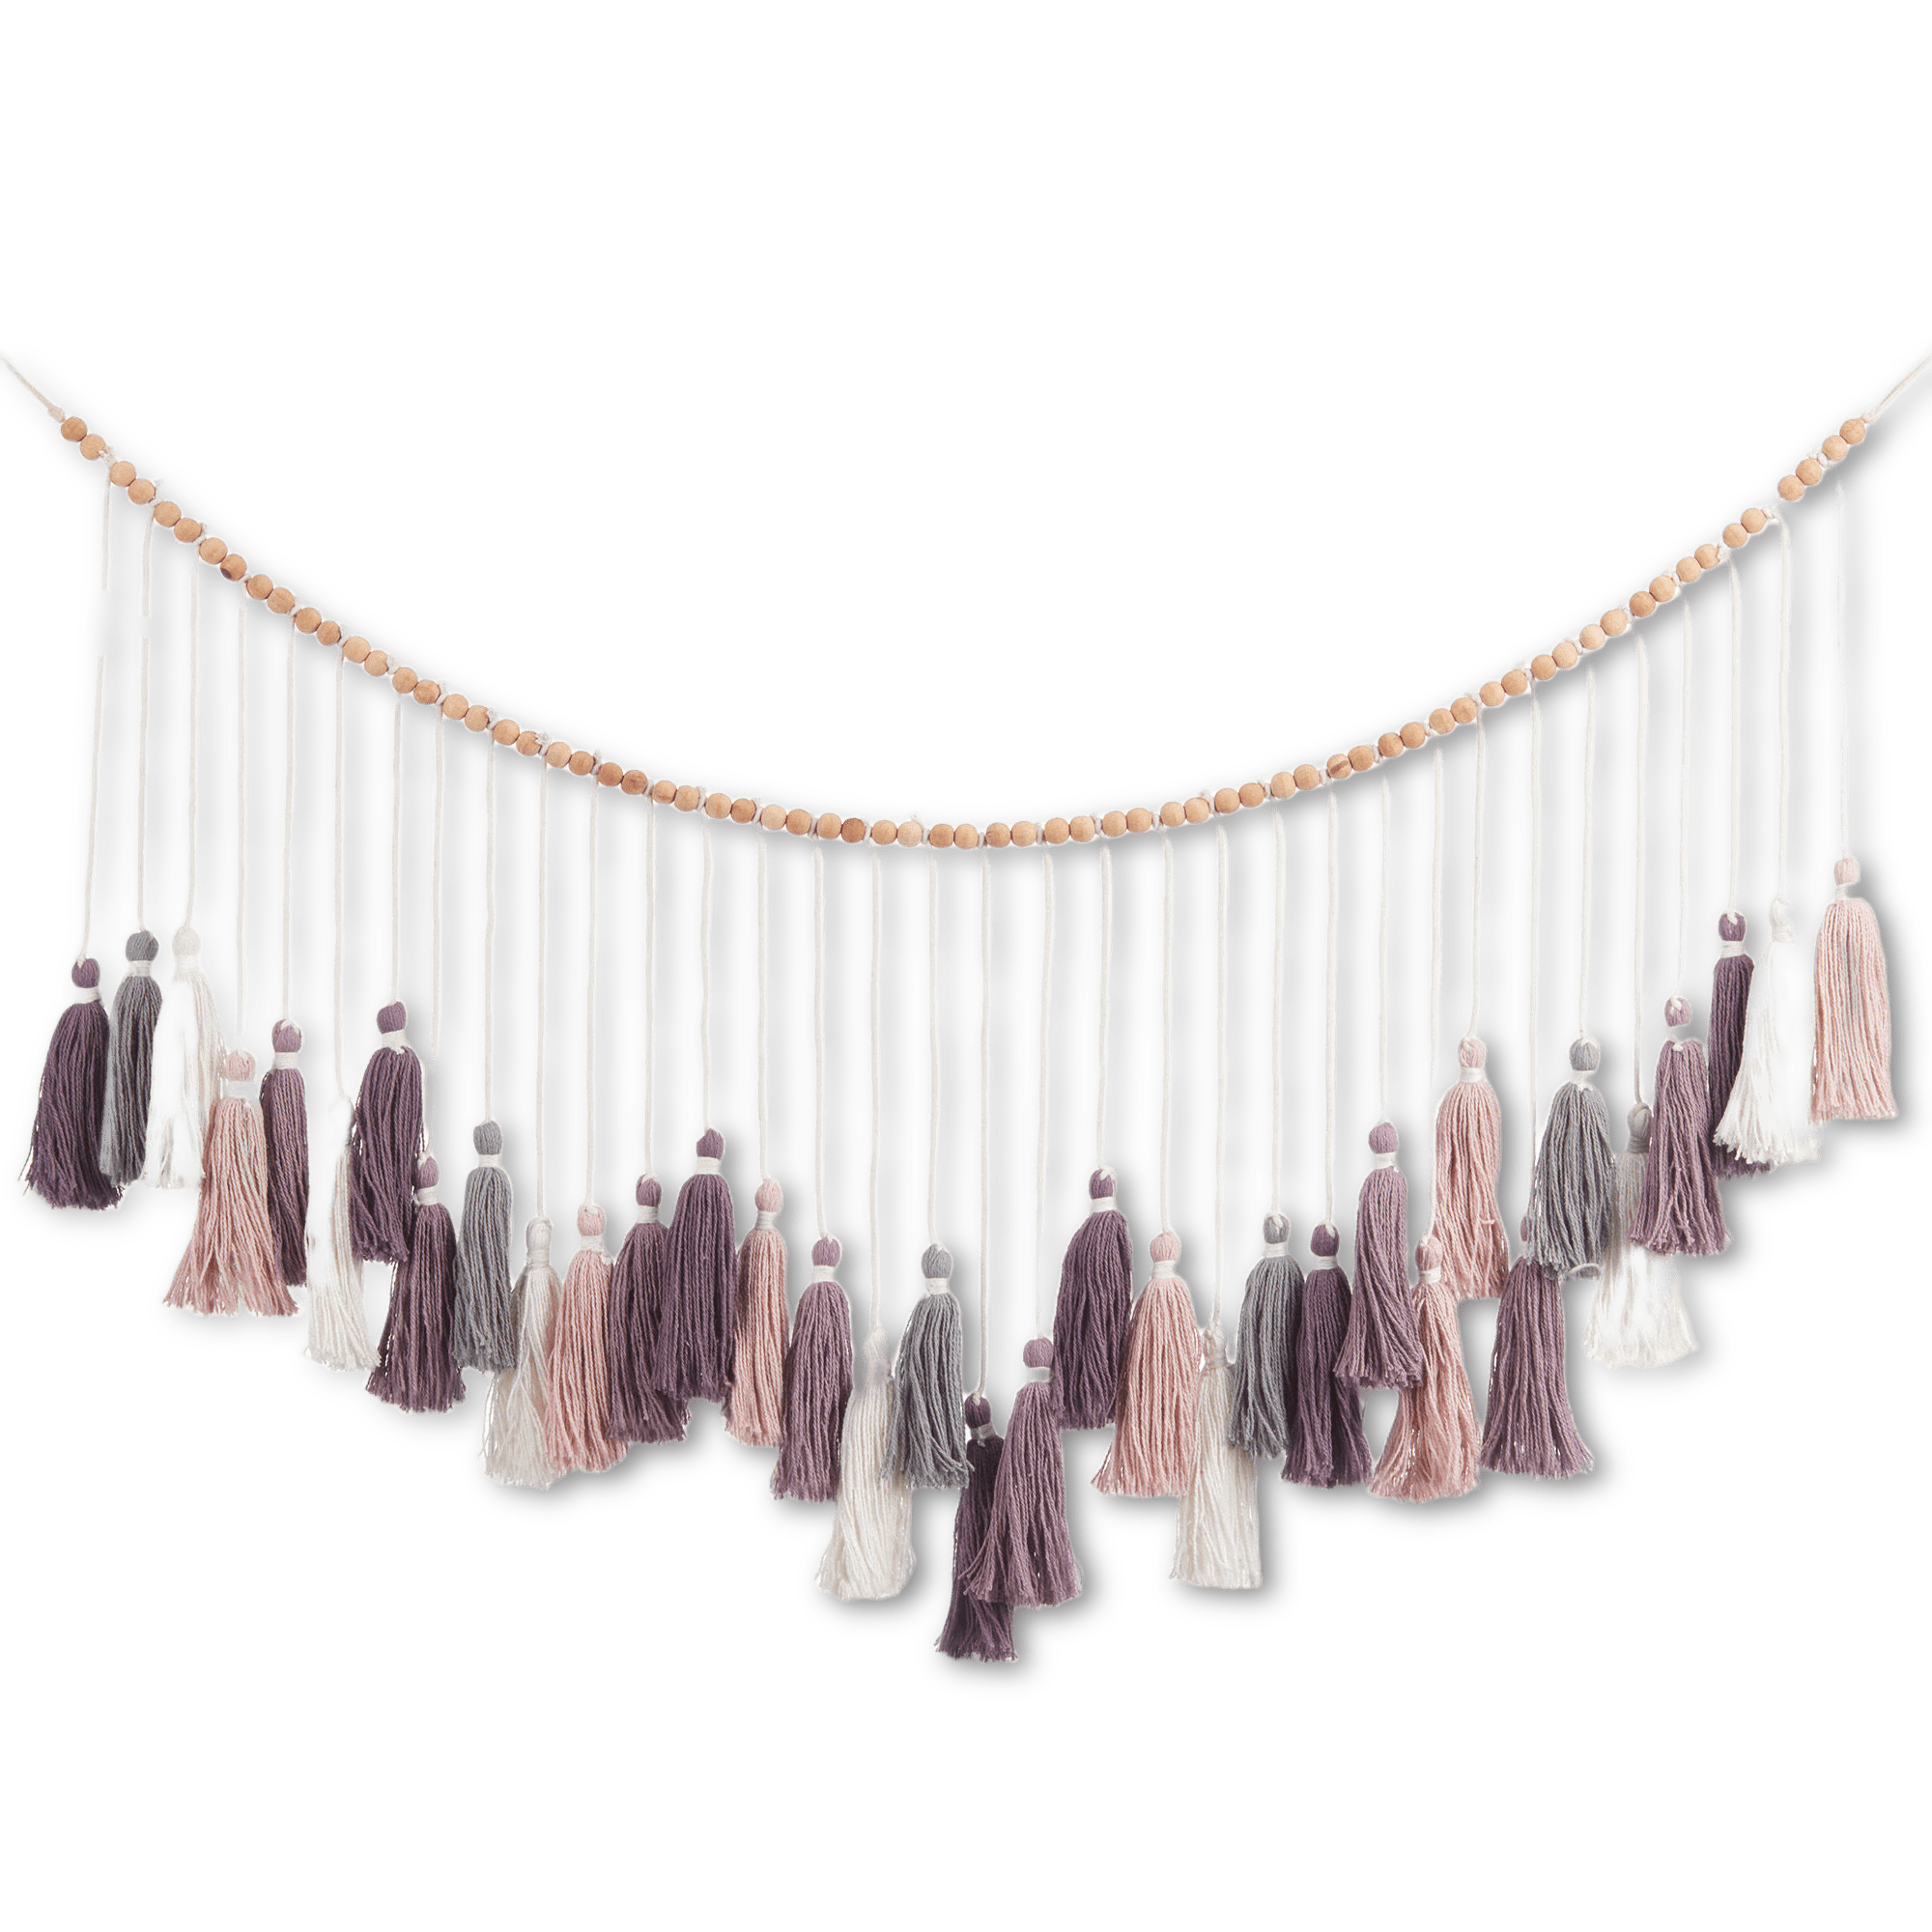 Beads and Tassels Garland